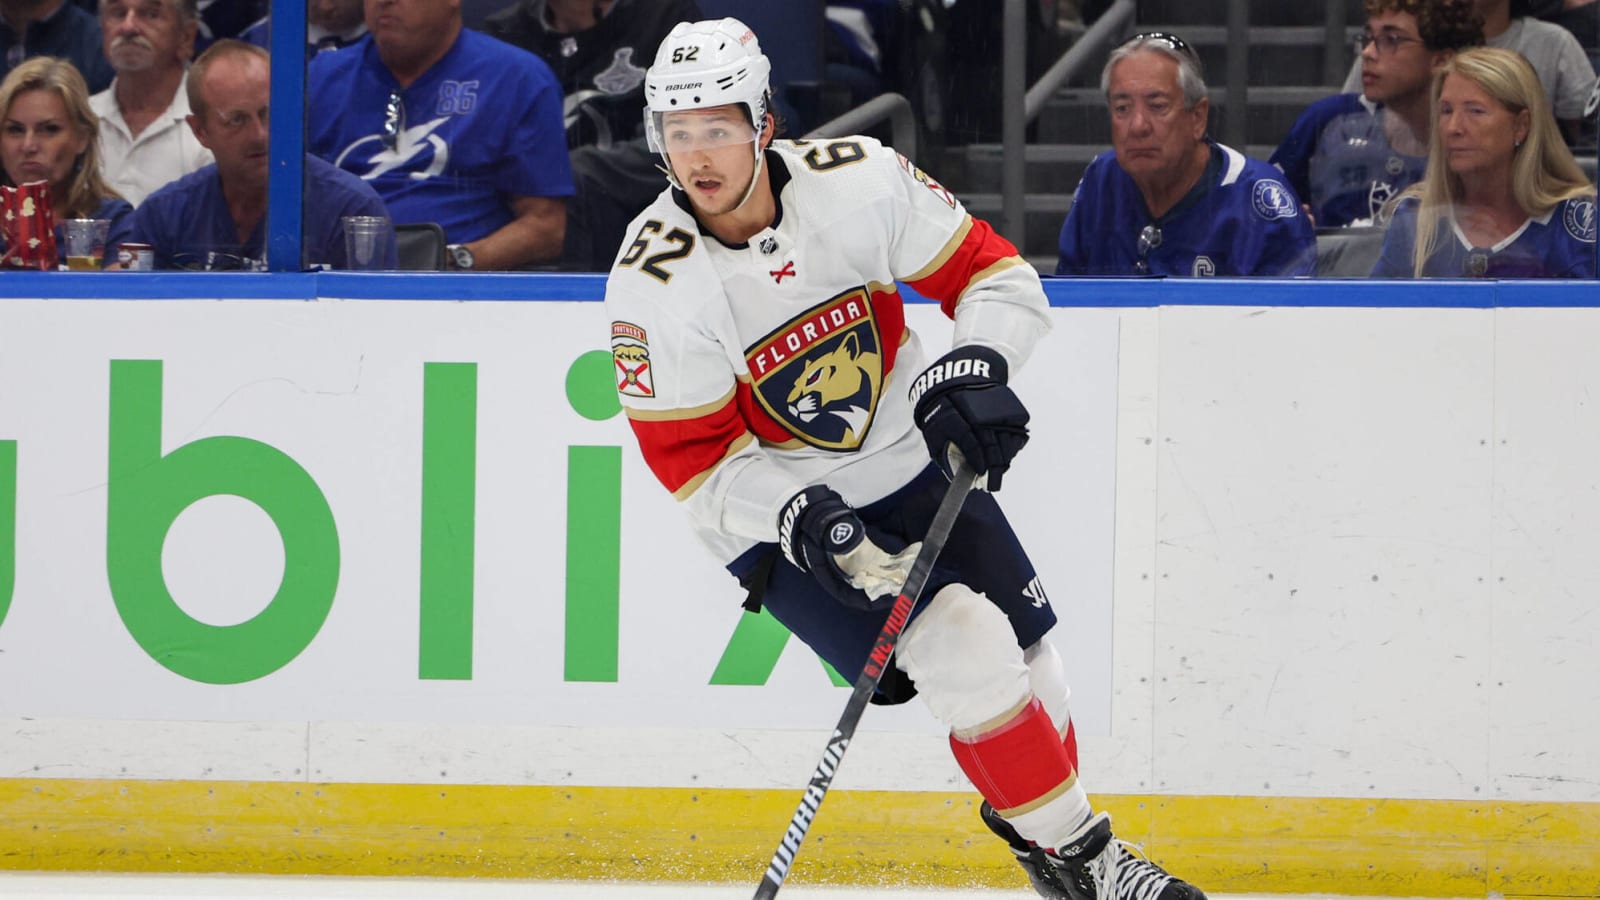 Panthers D Brandon Montour injured, but will not be replaced in team's lineup